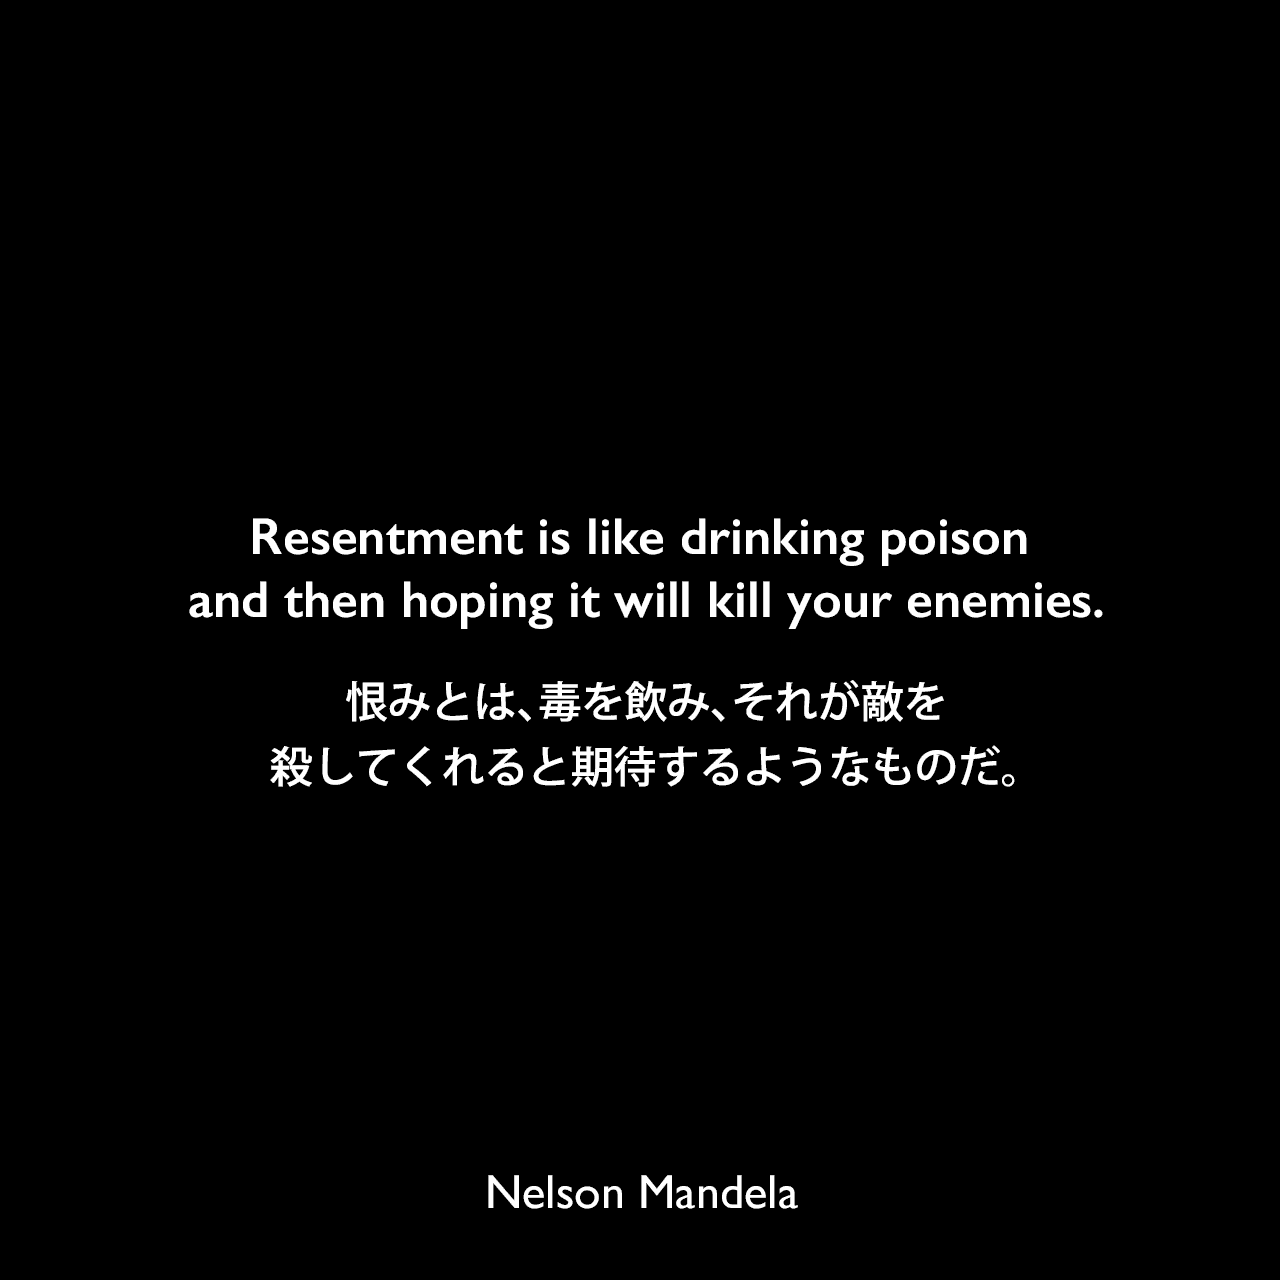 Resentment is like drinking poison and then hoping it will kill your enemies.恨みとは、毒を飲み、それが敵を殺してくれると期待するようなものだ。Nelson Mandela